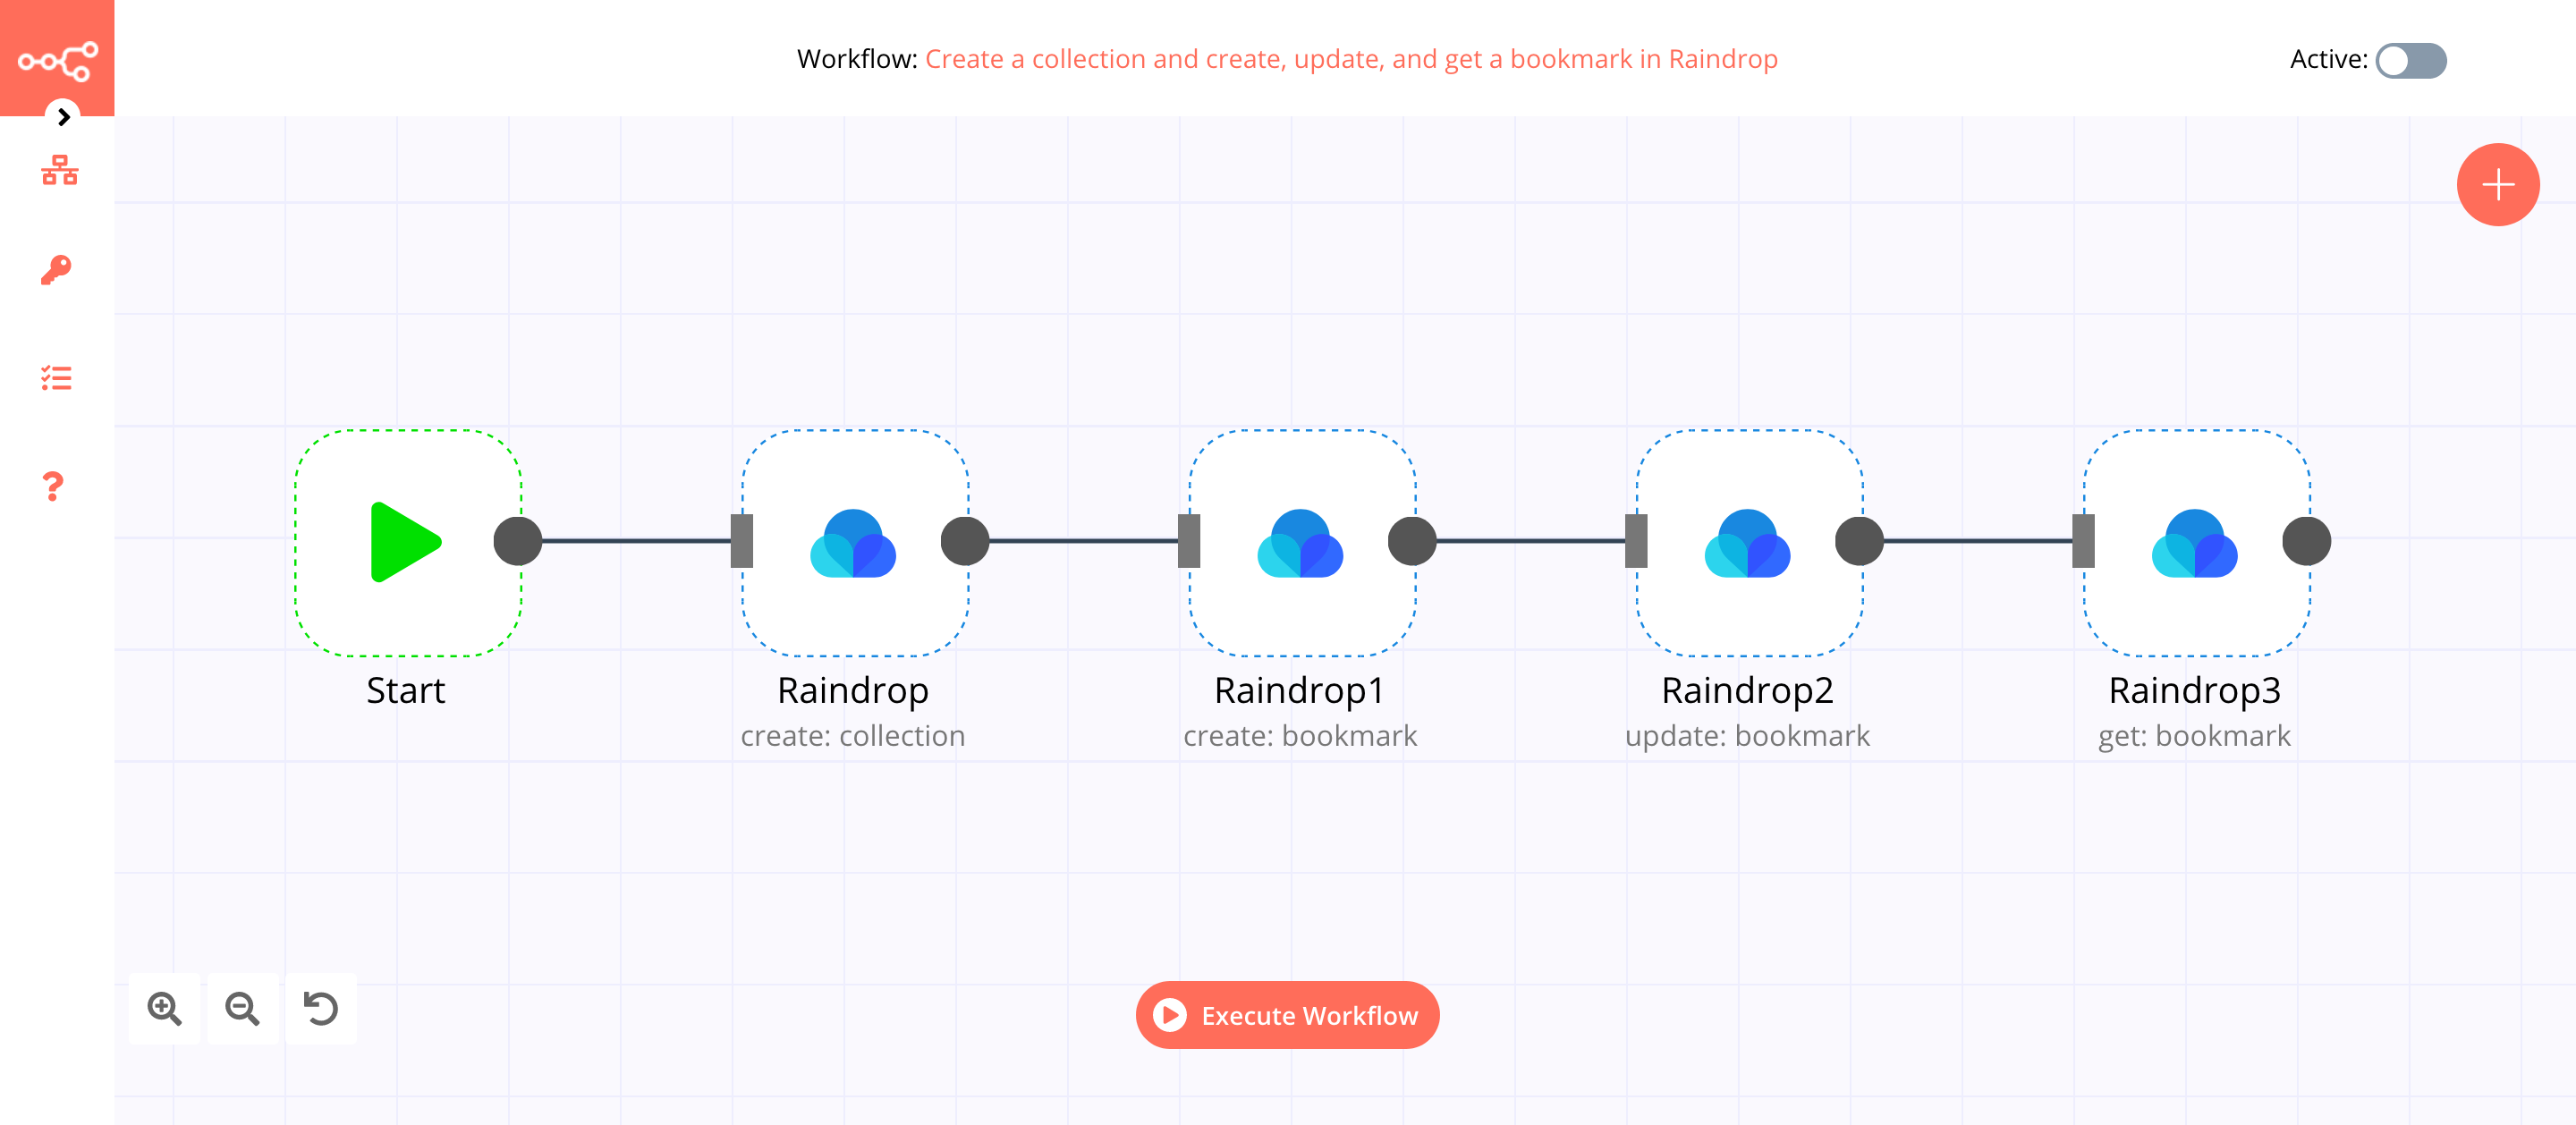 A workflow with the Raindrop node